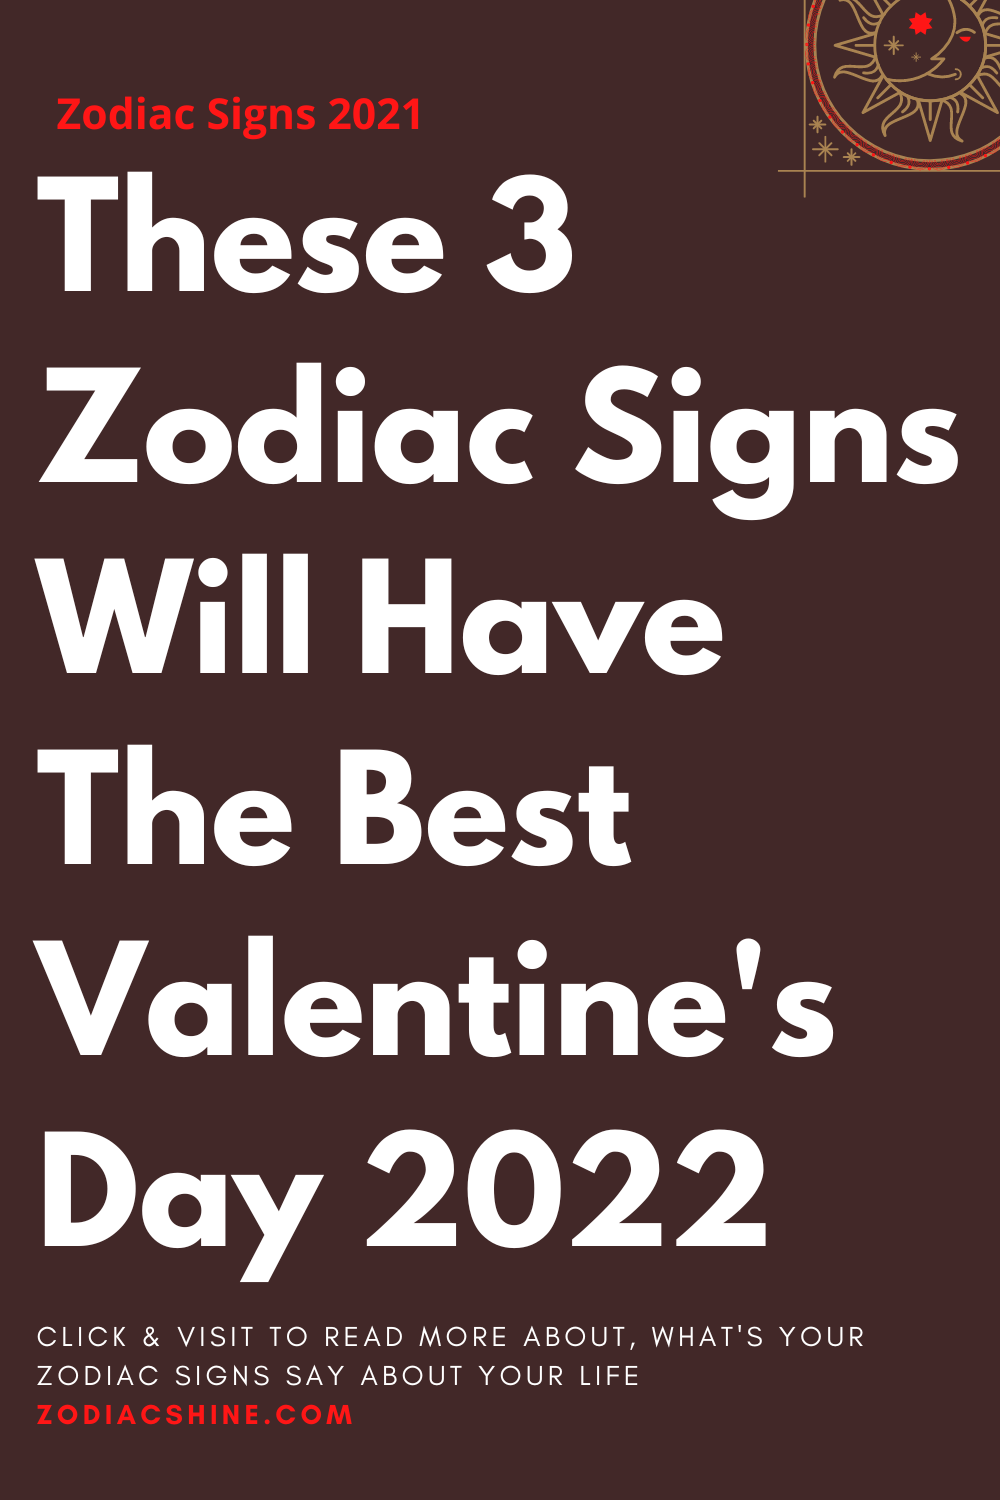 These 3 Zodiac Signs Will Have The Best Valentine's Day 2022